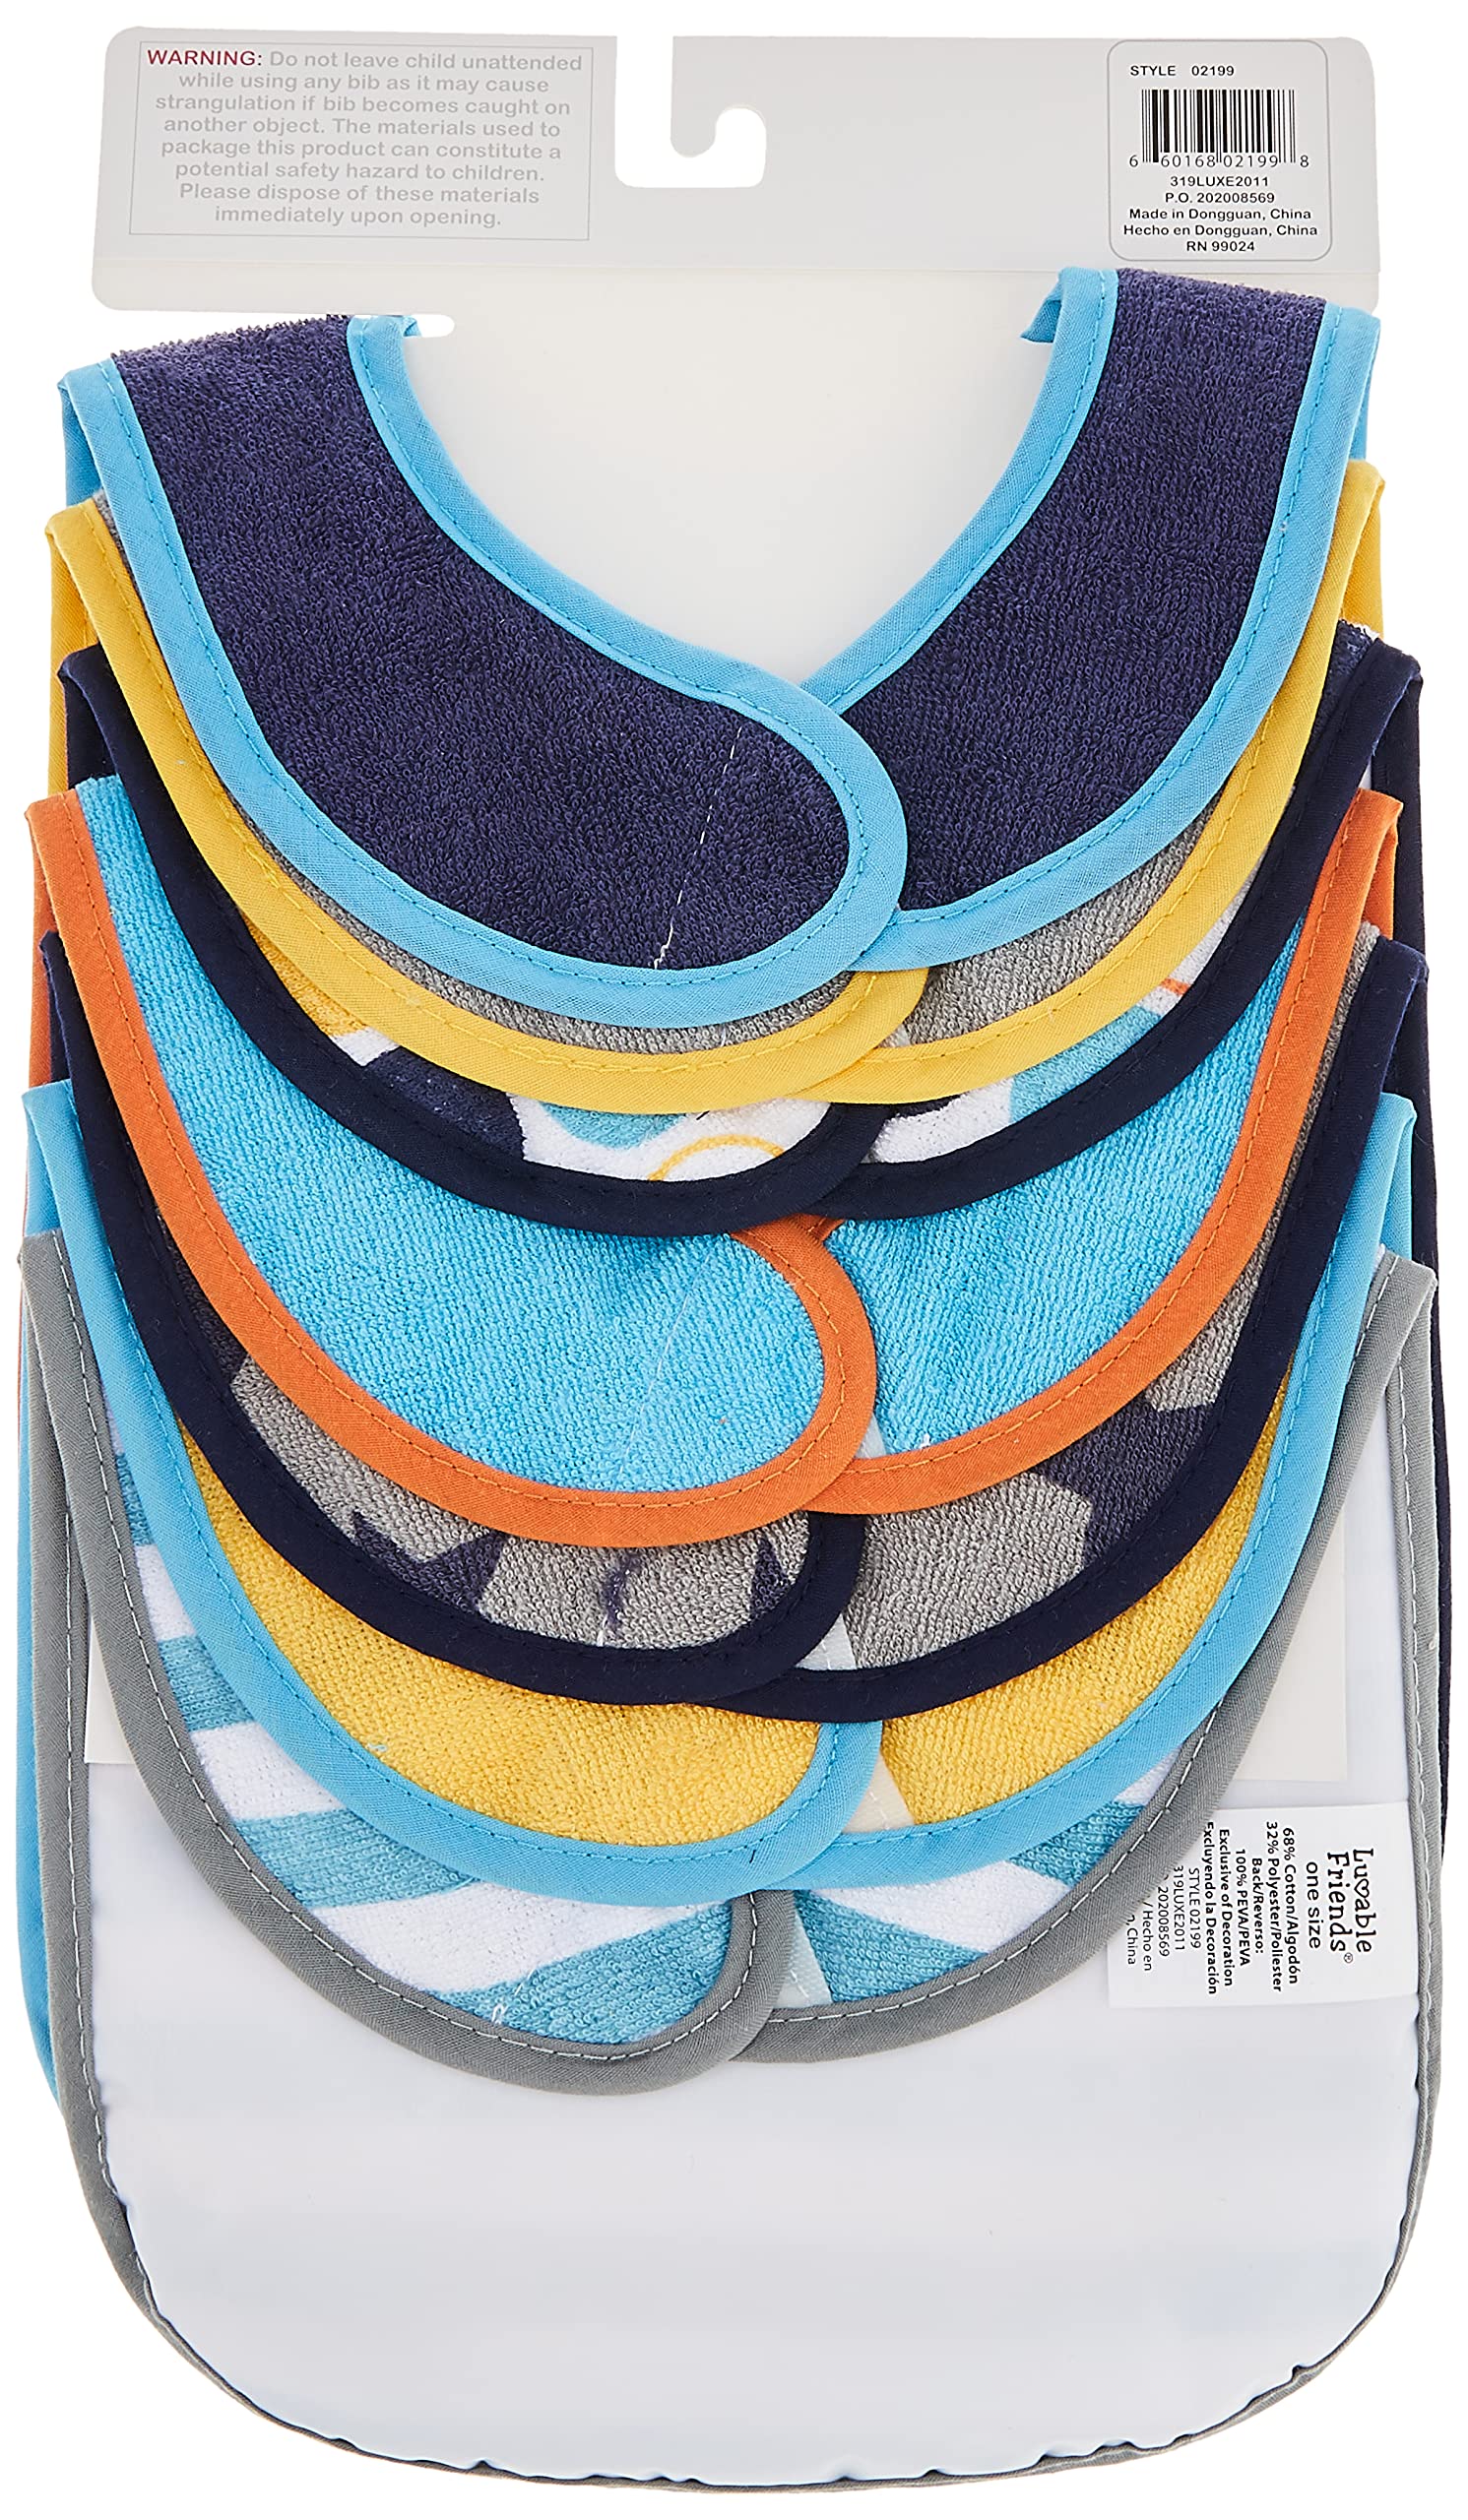 Luvable Friends Unisex Baby Cotton Terry Drooler Bibs with PEVA Back, Blue Rocket, One Size